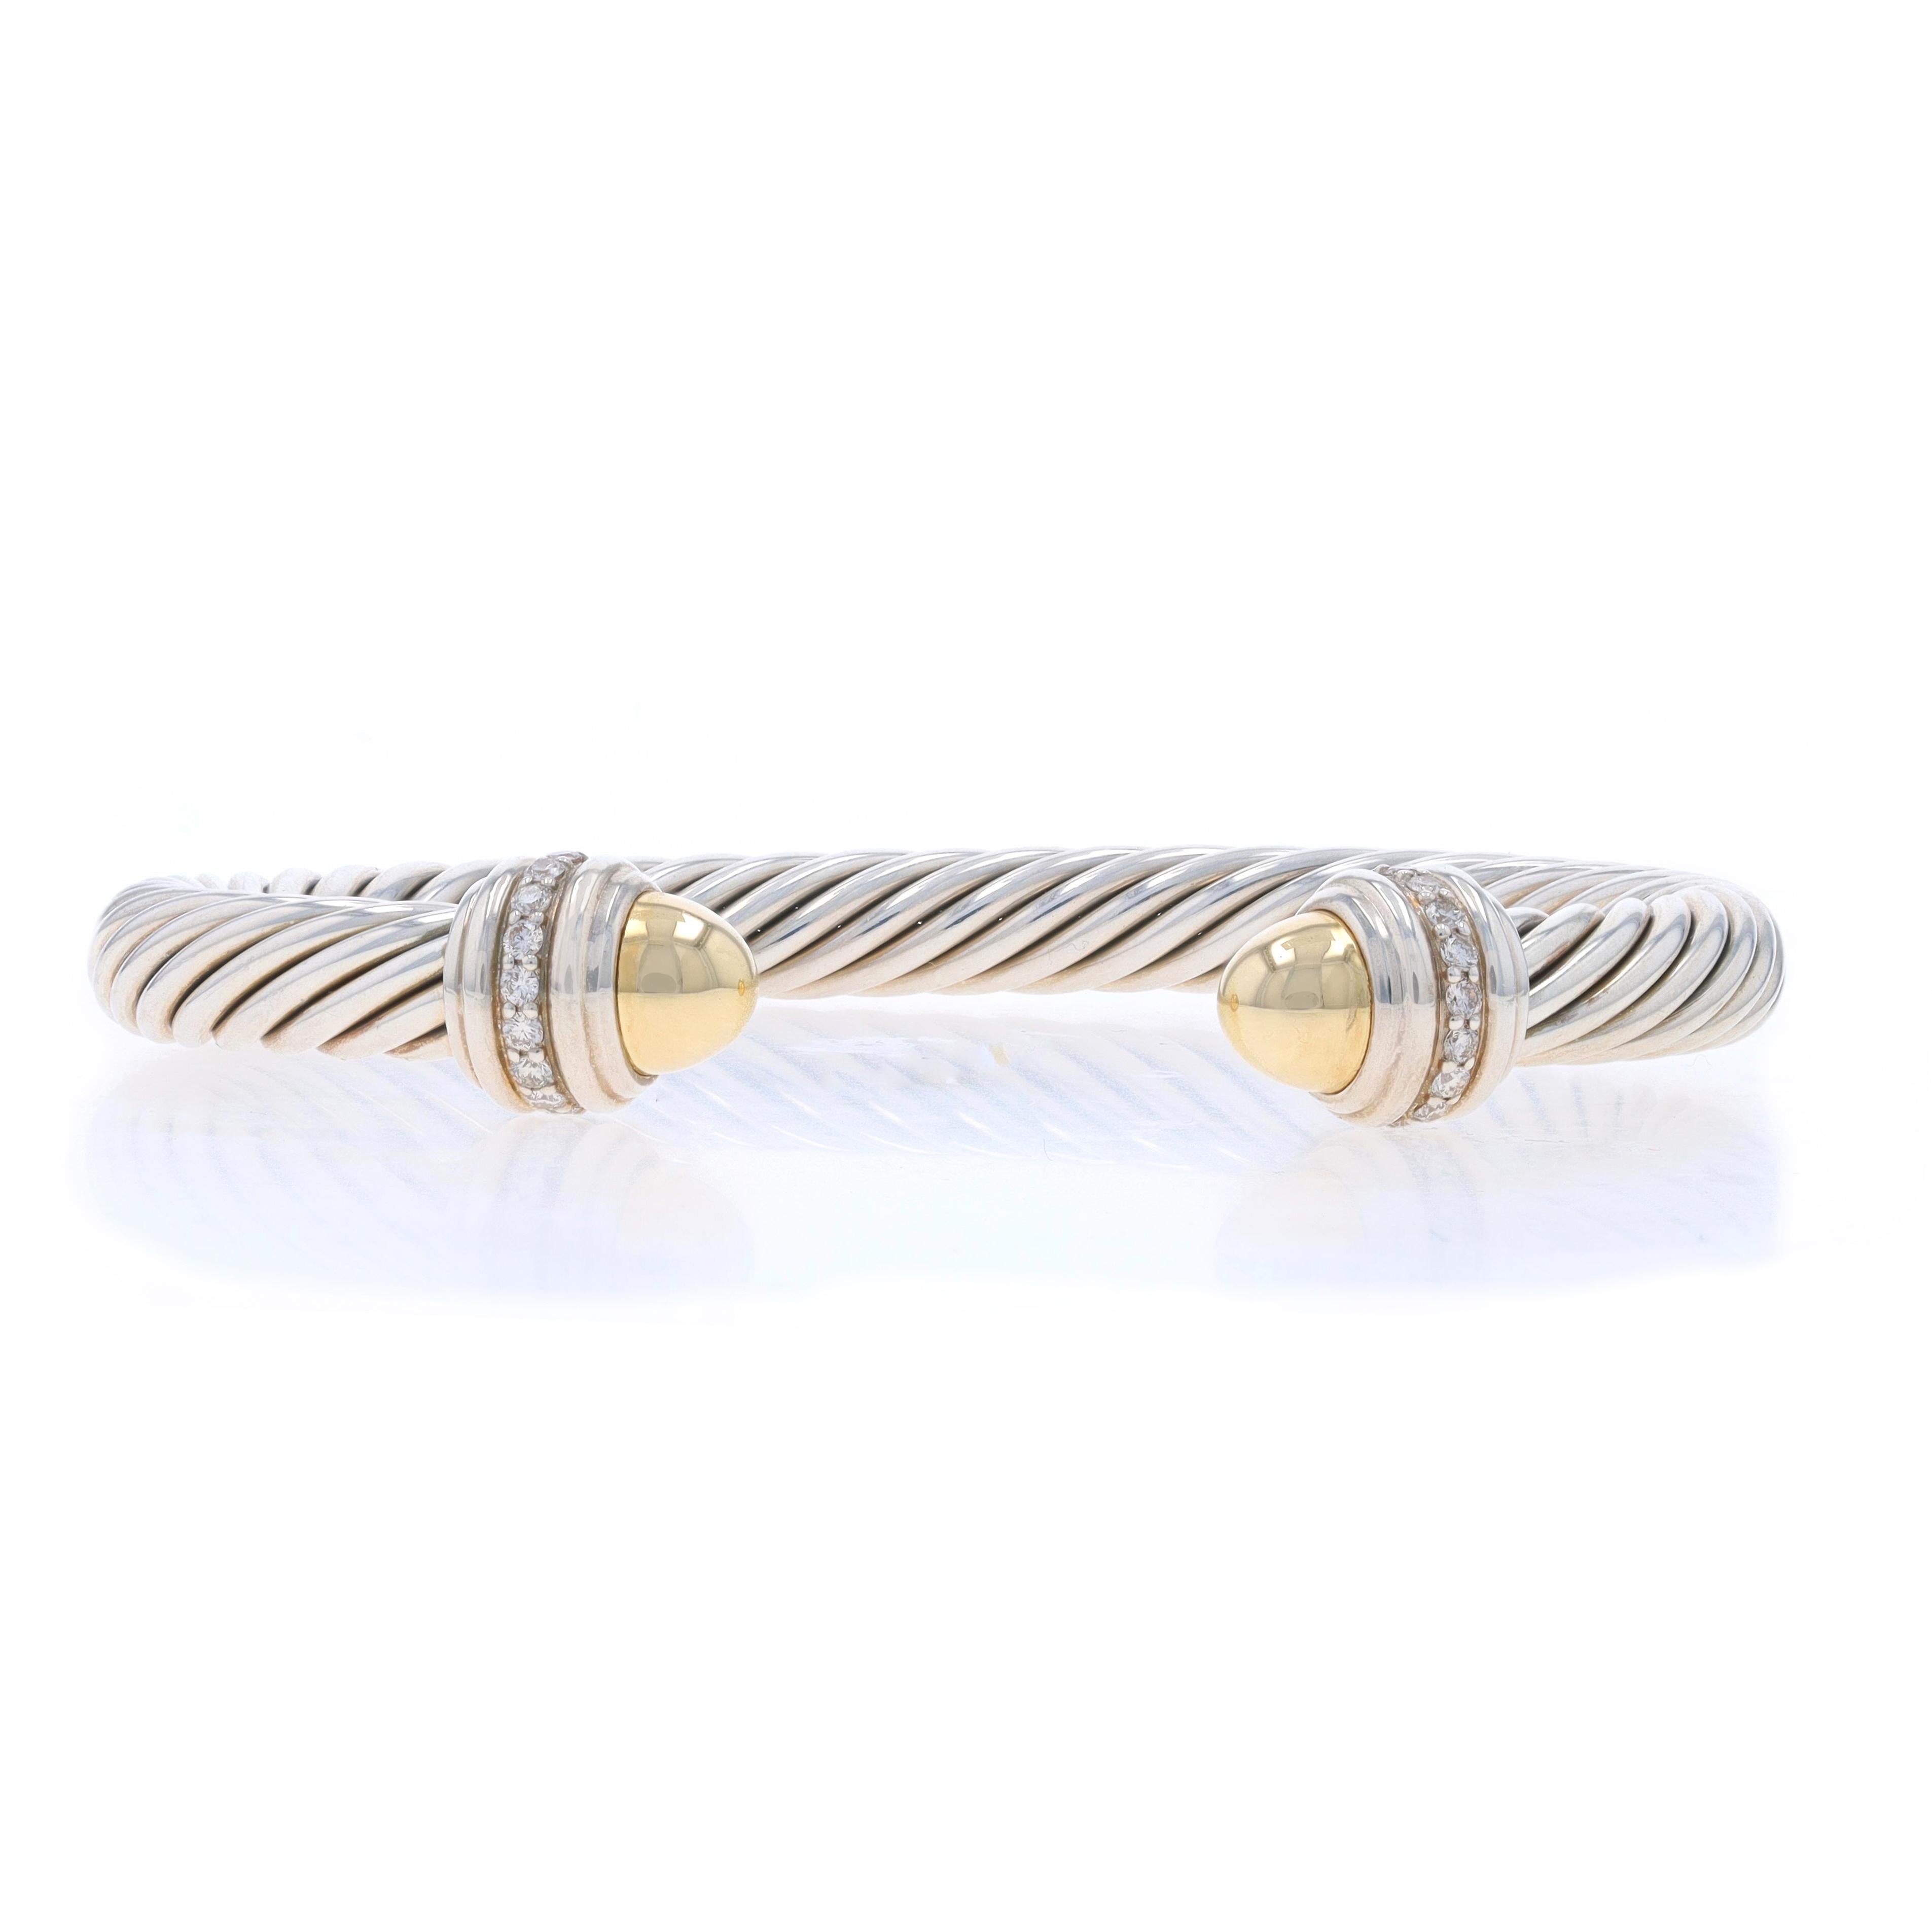 Retail Price: $1800

Brand: David Yurman
Collection: Classic Cable
Design:  7mm Cuff

Metal Content: Sterling Silver & 14k Yellow Gold

Stone Information

Natural Diamonds
Carat(s): .48ctw
Cut: Round Brilliant

Total Carats: 0.48ctw

Style: